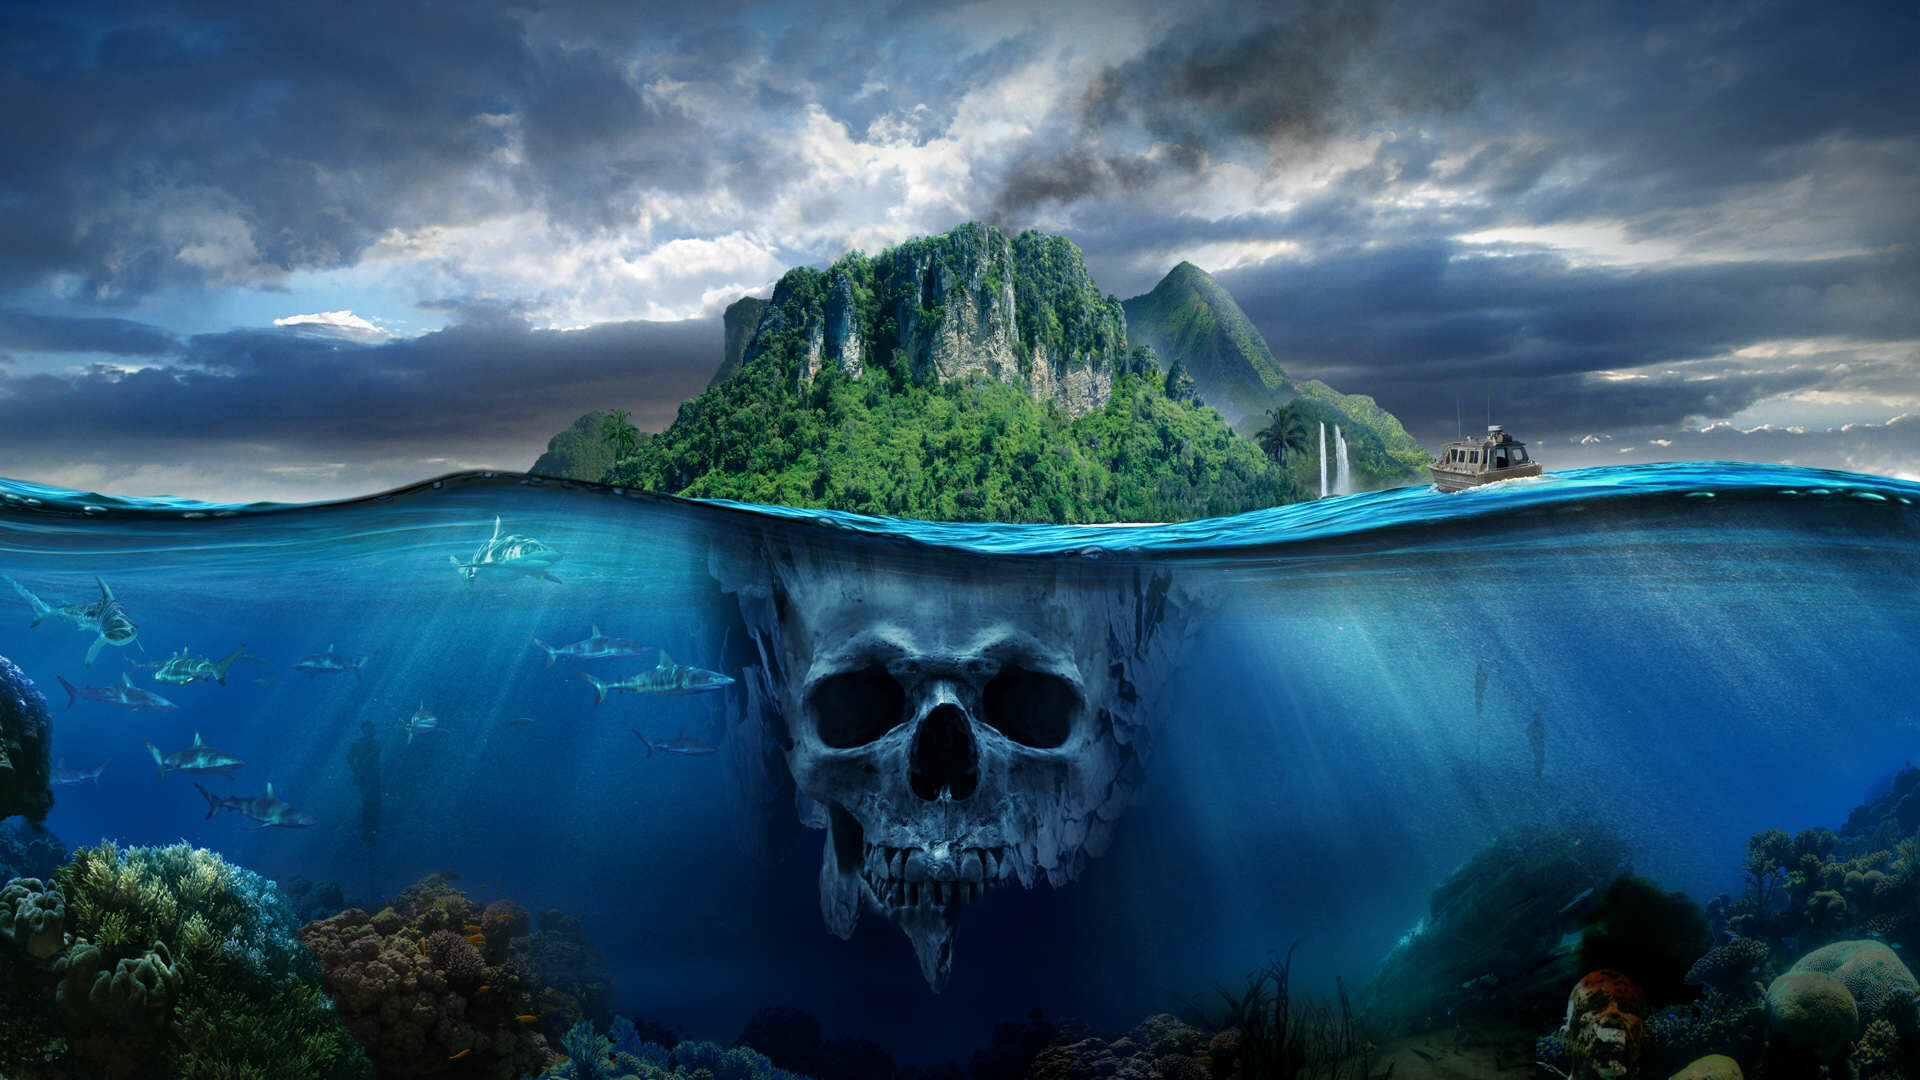 Far Cry 3: Rook Islands is an open world in which players can explore freely. 1920x1080 Full HD Wallpaper.